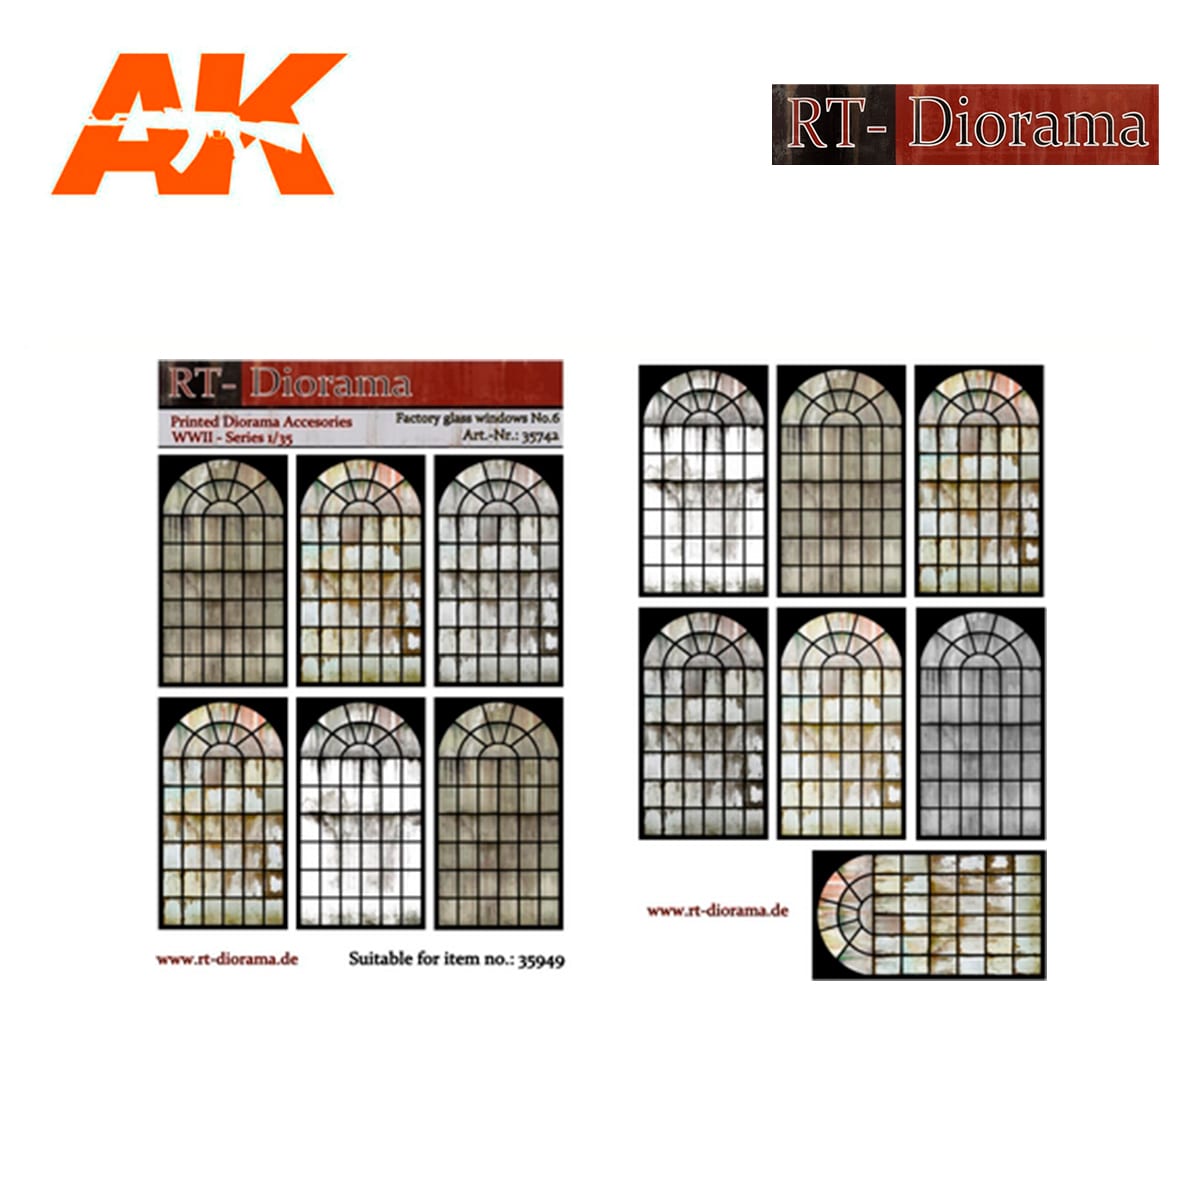 Printed Accesories: Factory glass windows Nr.6